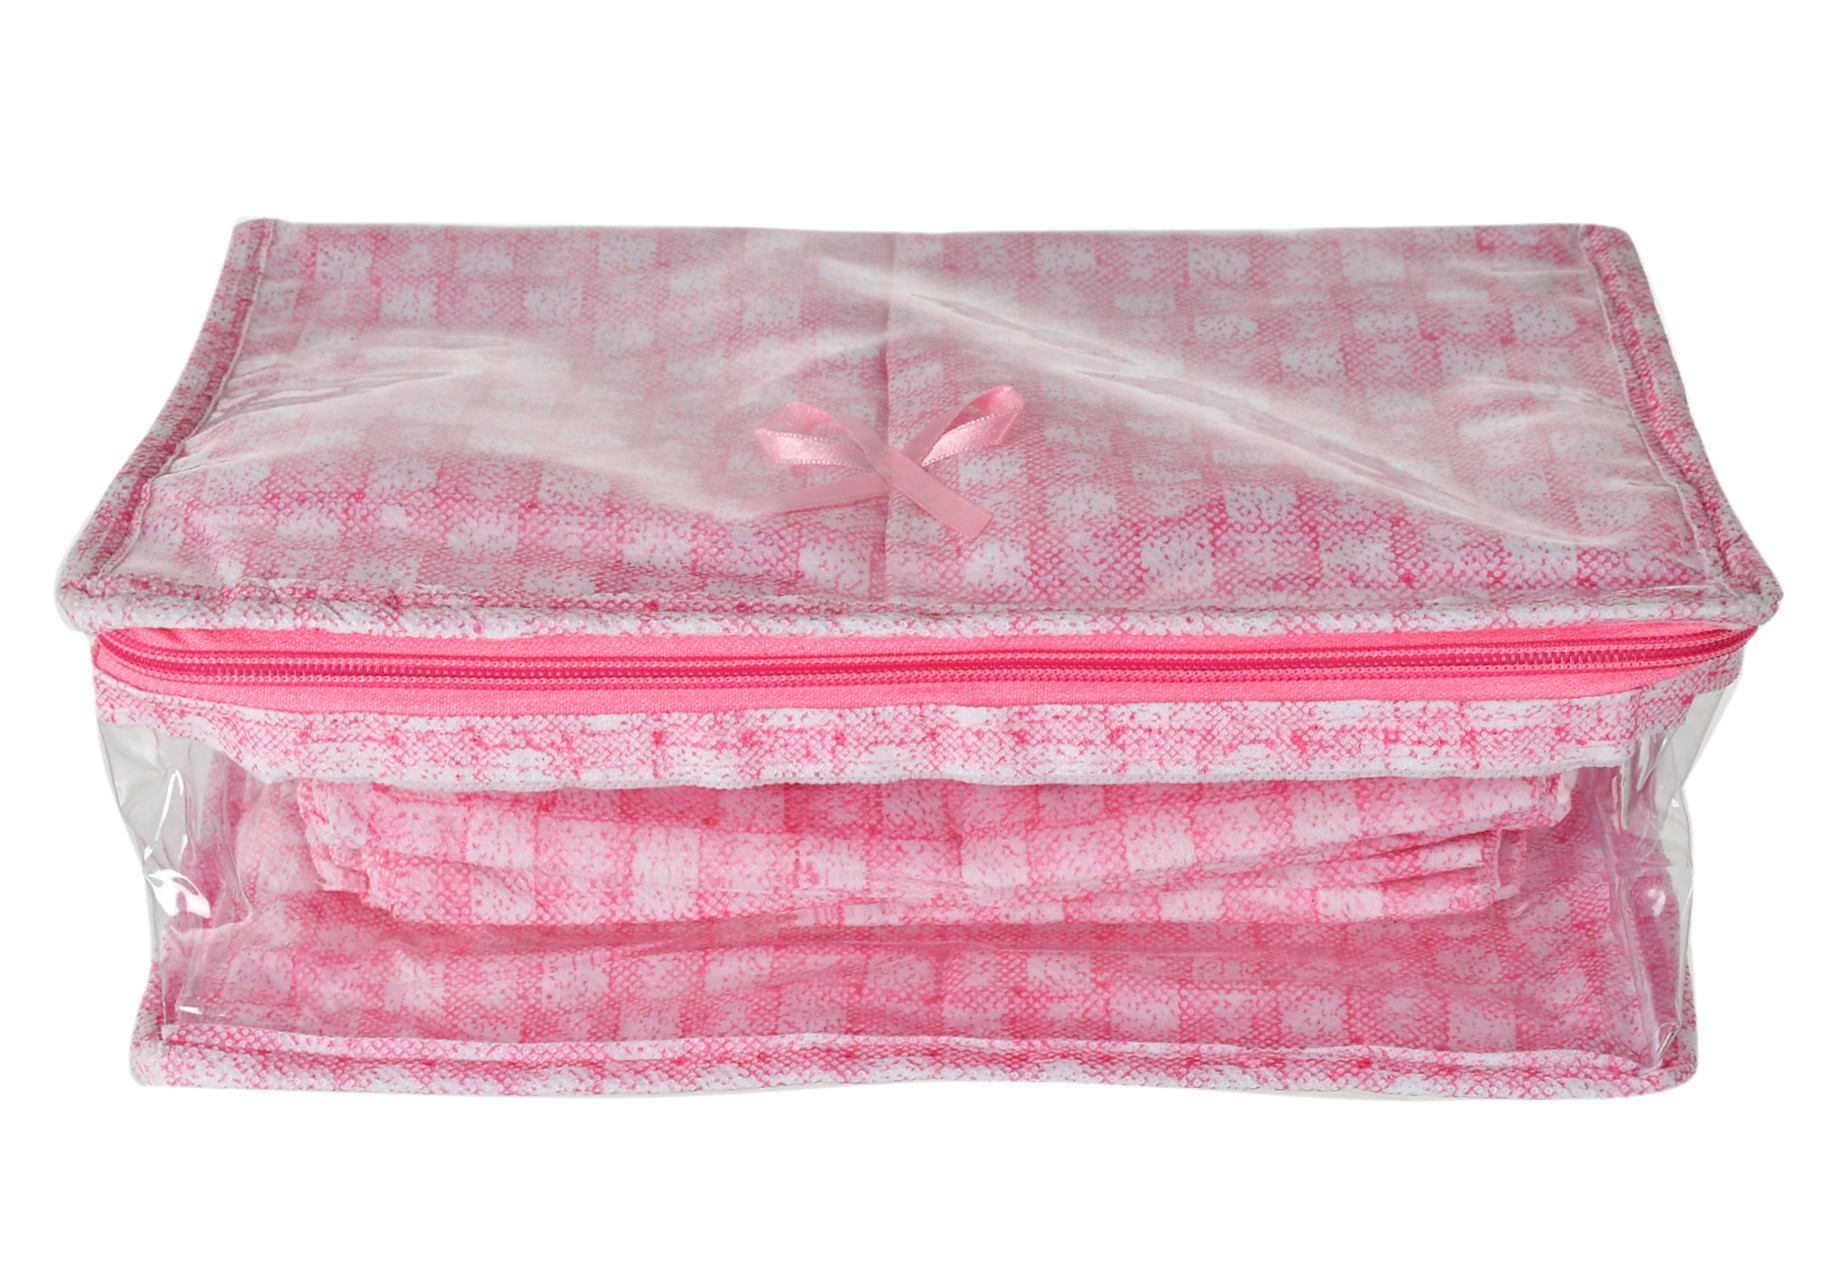 Kuber Industries Check Design Laminated PVC Travel Jewelry Organiser, Jewelry Storage Bags for Necklace, Earrings, Rings, Bracelet With 13 Transparent Pouches (Pink)-HS_38_KUBMART21261